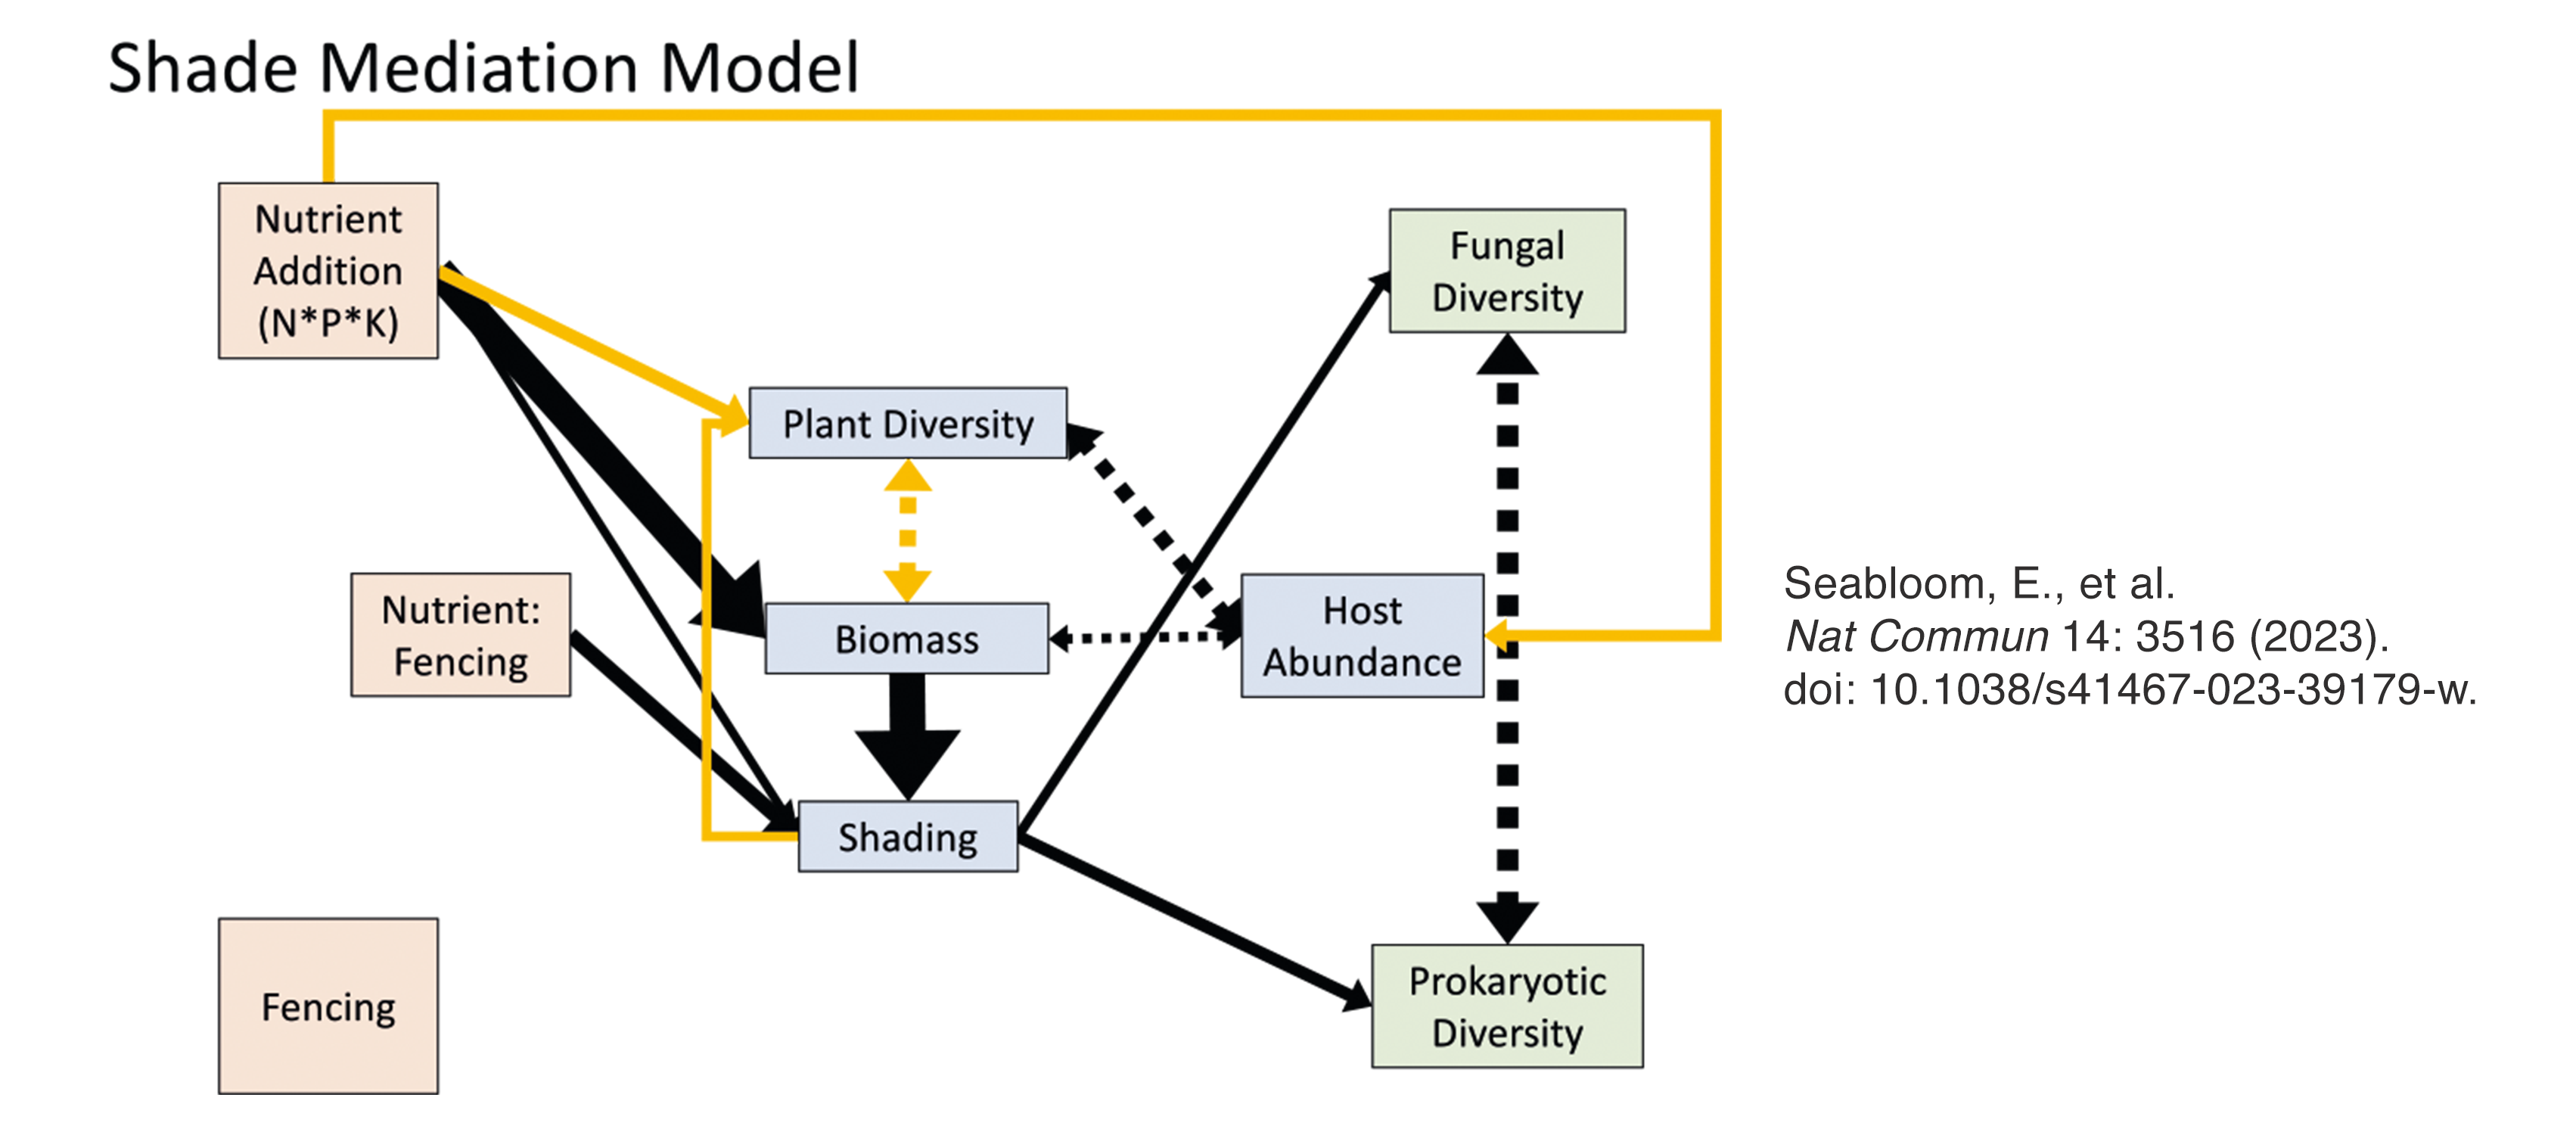 Flowchart illustrating that nutrient and fencing effects on leaf-scale endophyte diversity are mediated by biomass effects on shade